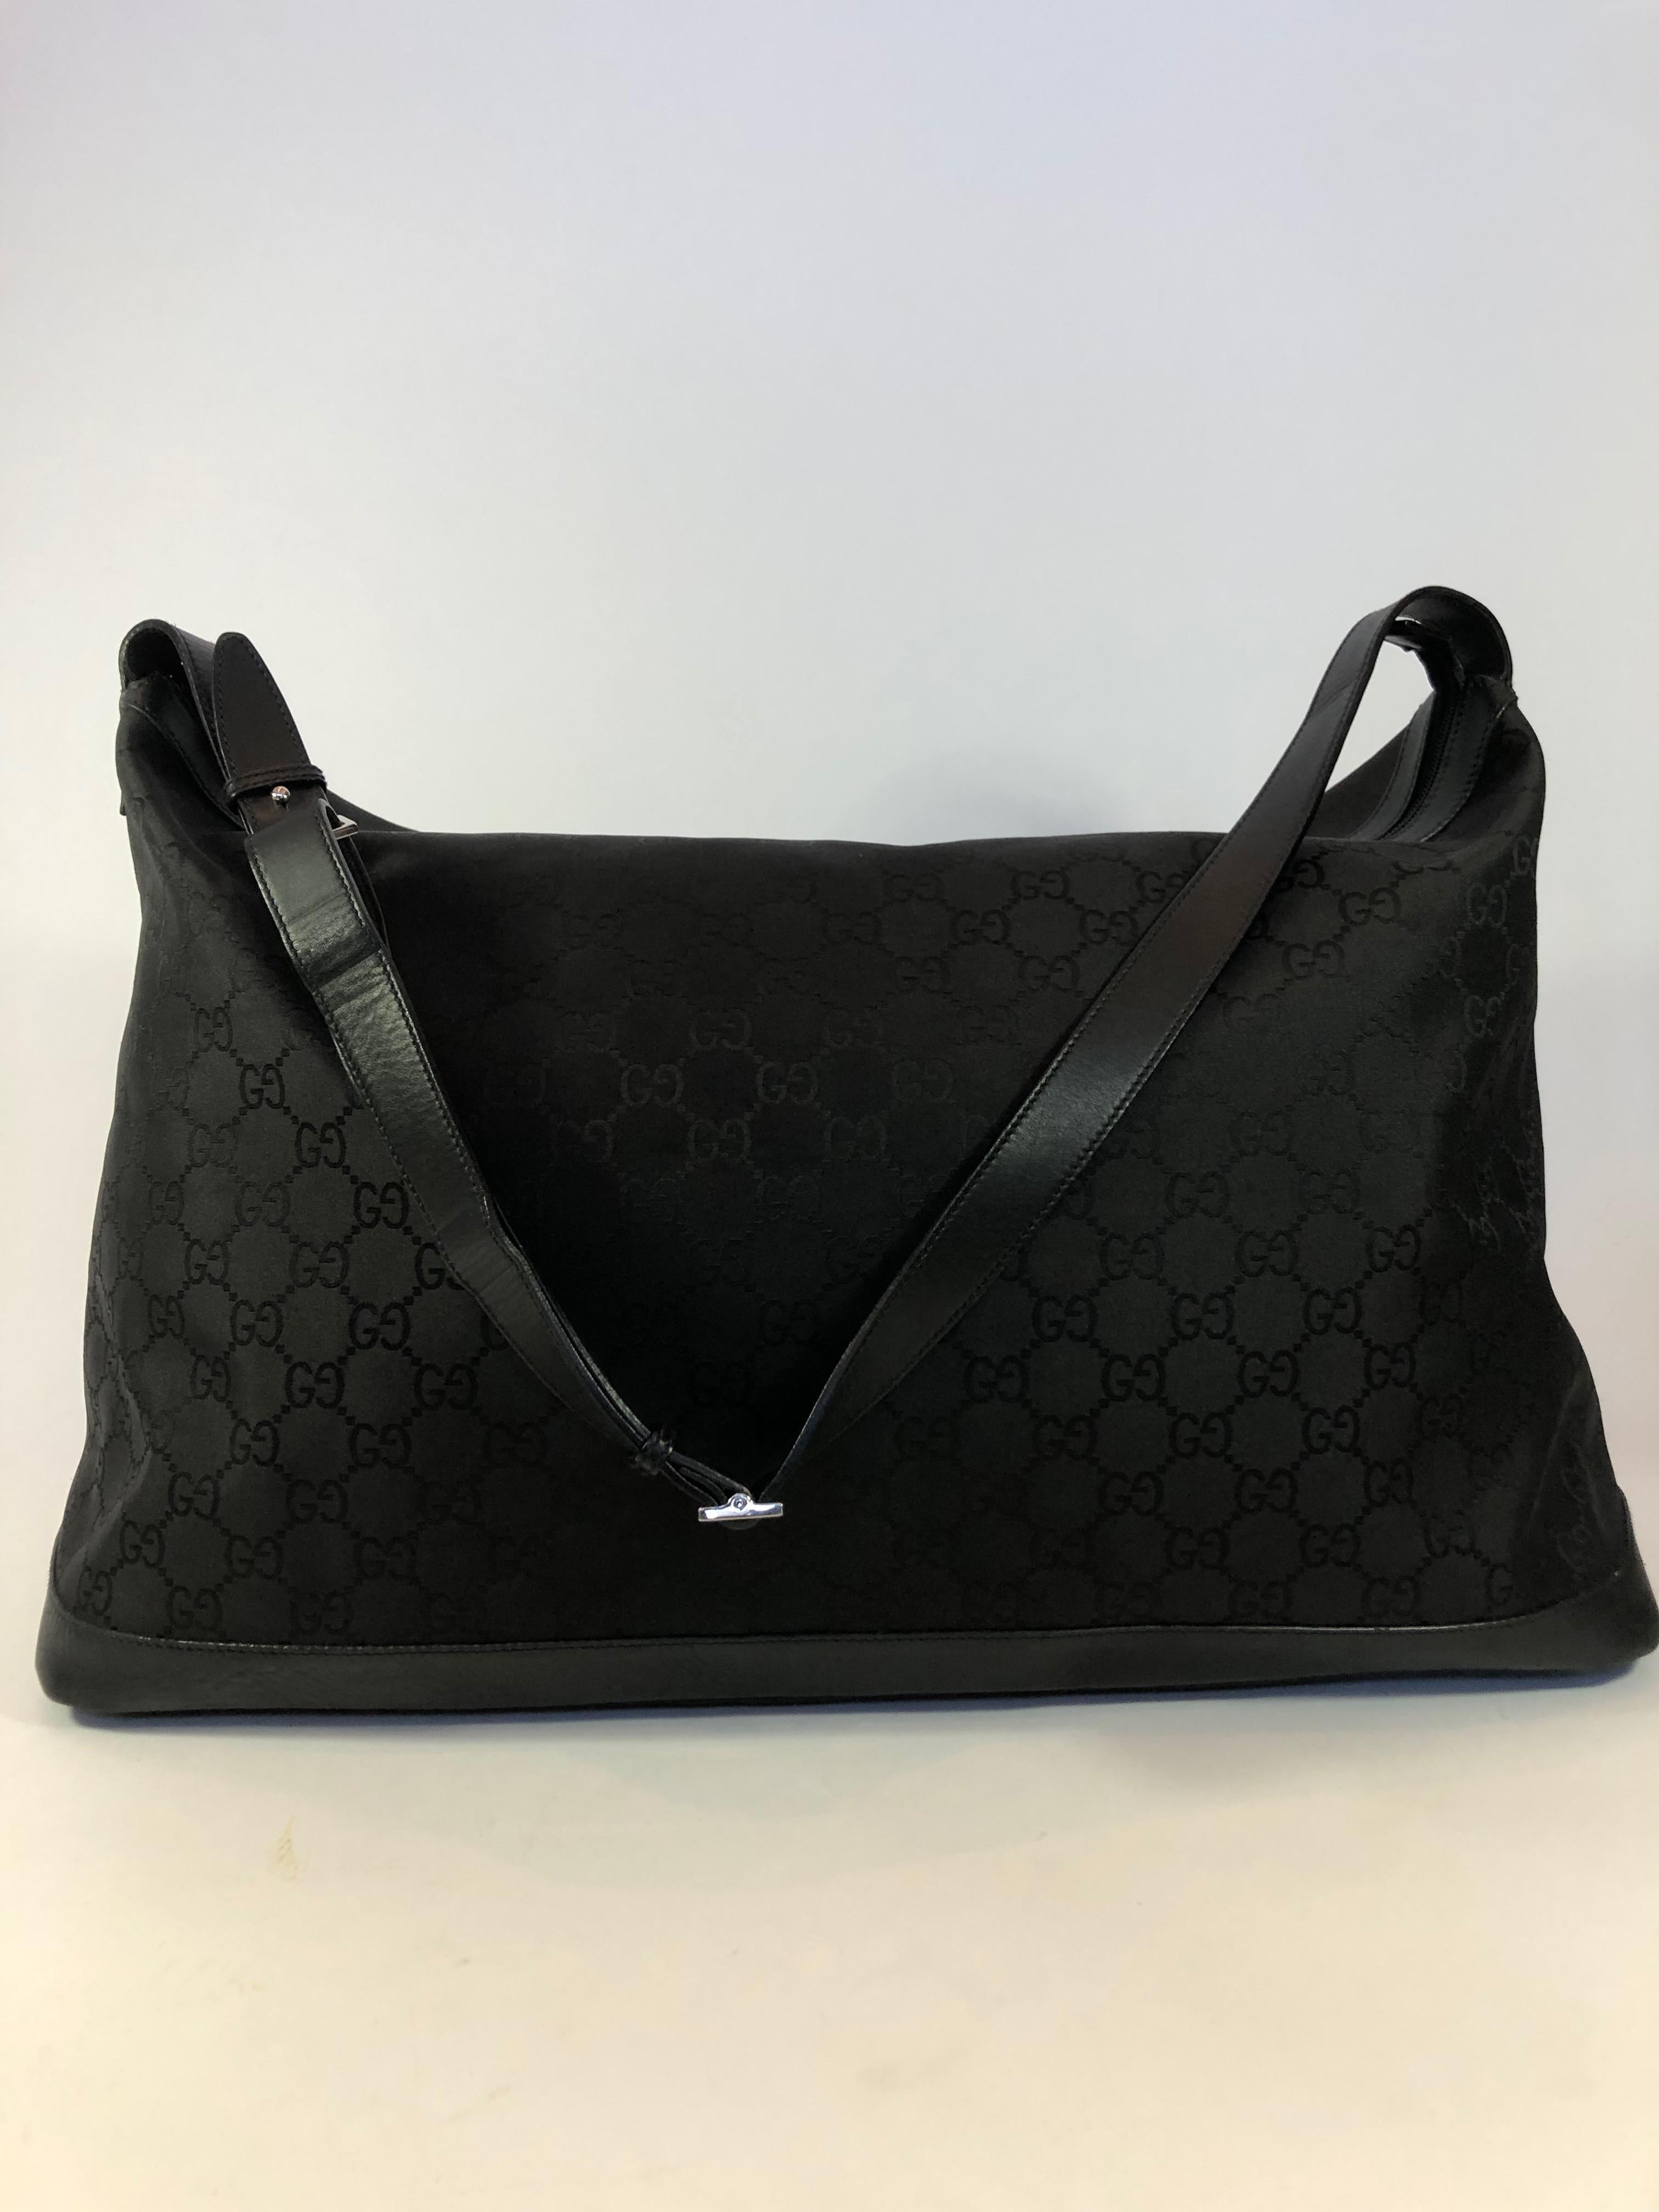 Gucci Soft Black on Black GG Logo Duffle Bag with strap. Condition of bag is clean with no odors.

*MEASUREMENTS*
Length: 23